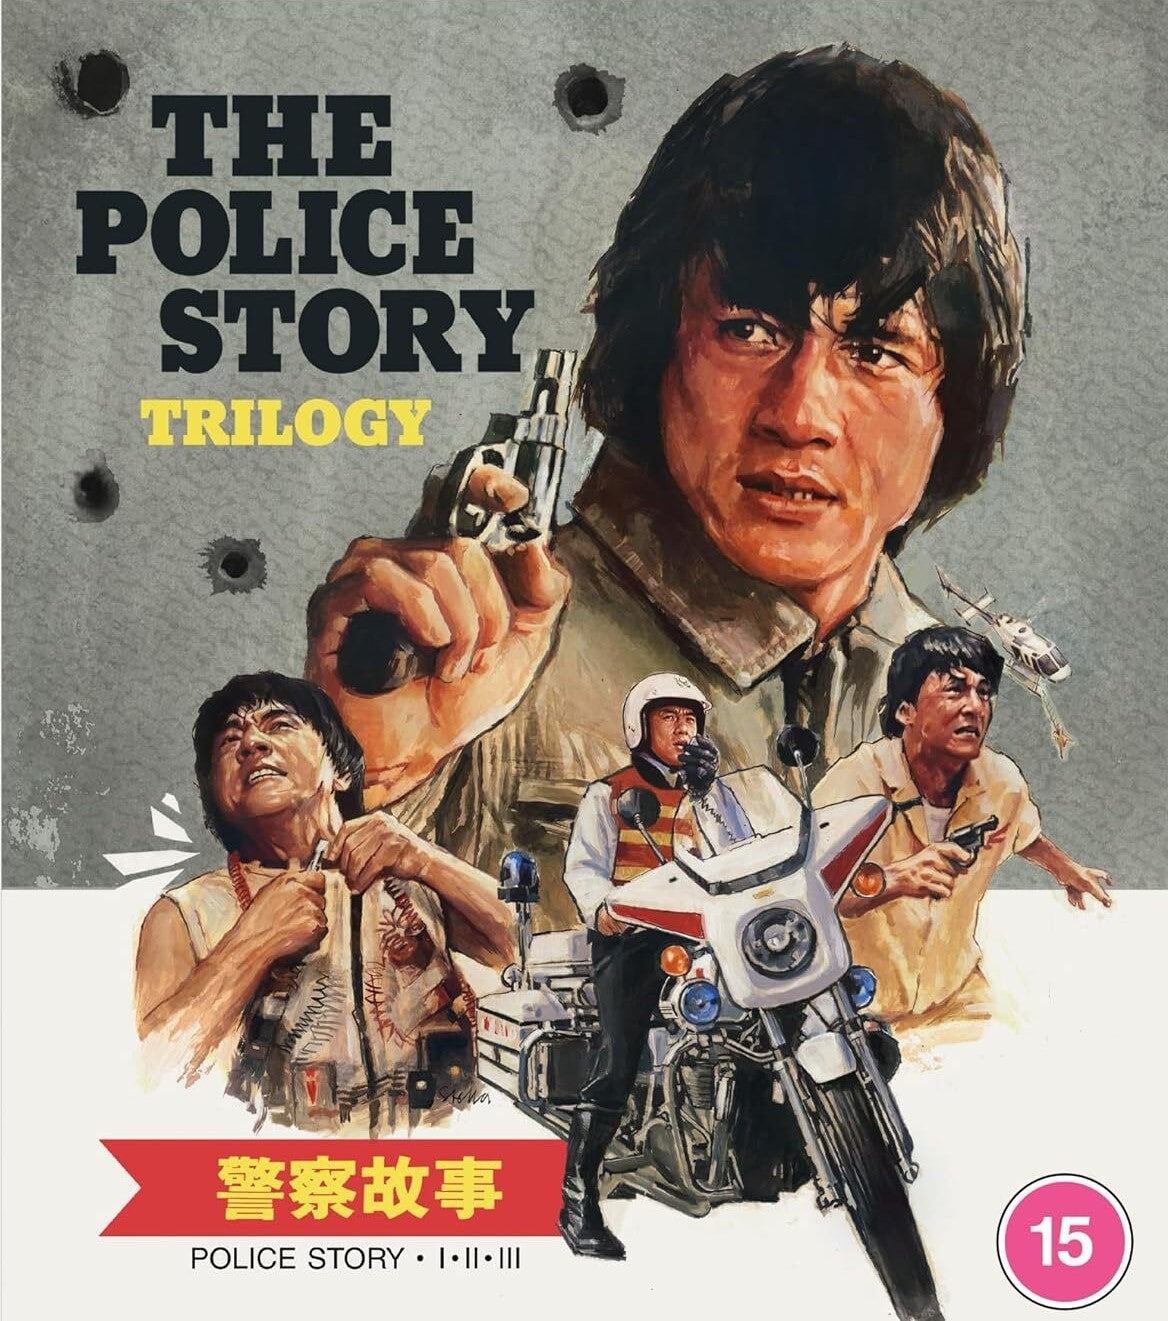 THE POLICE STORY TRILOGY (REGION FREE IMPORT) 4K UHD